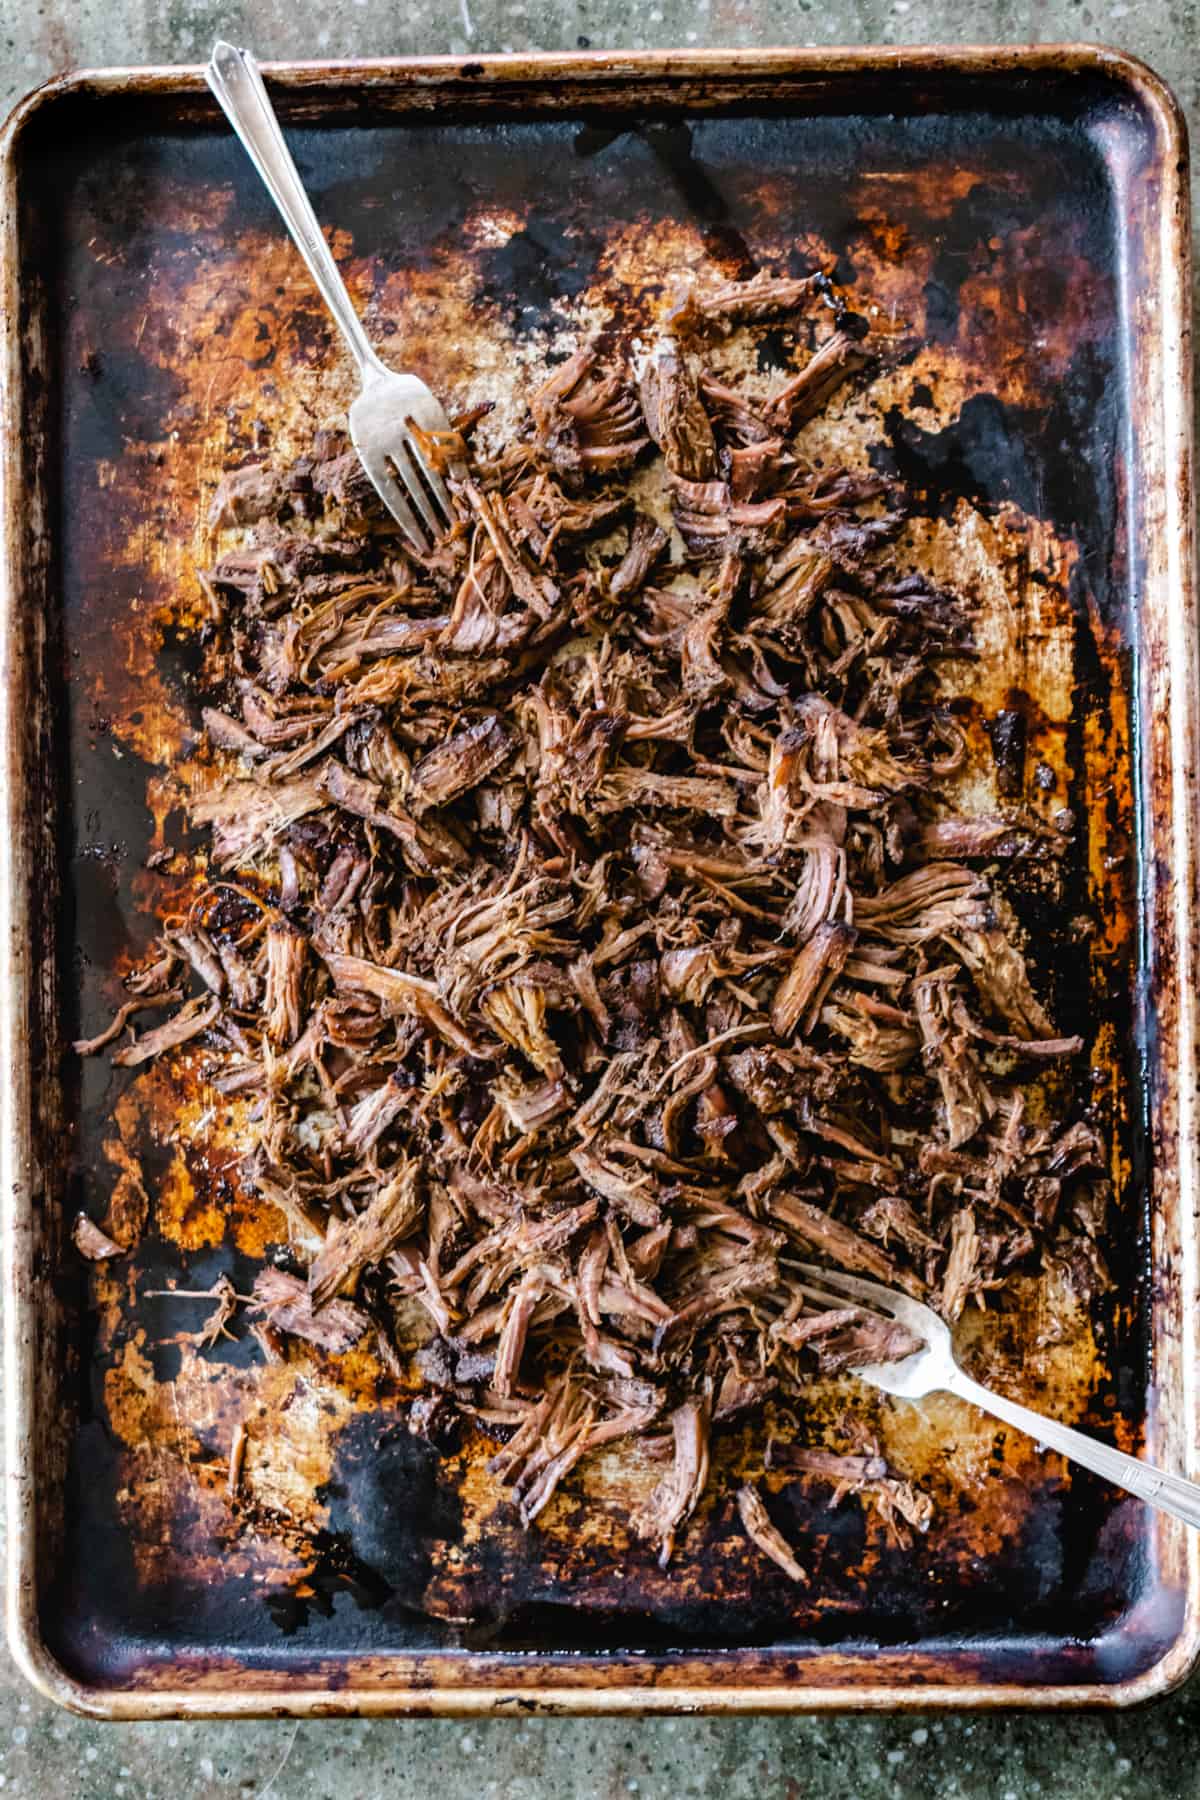 Sheet pan with shredded beef and two forks.